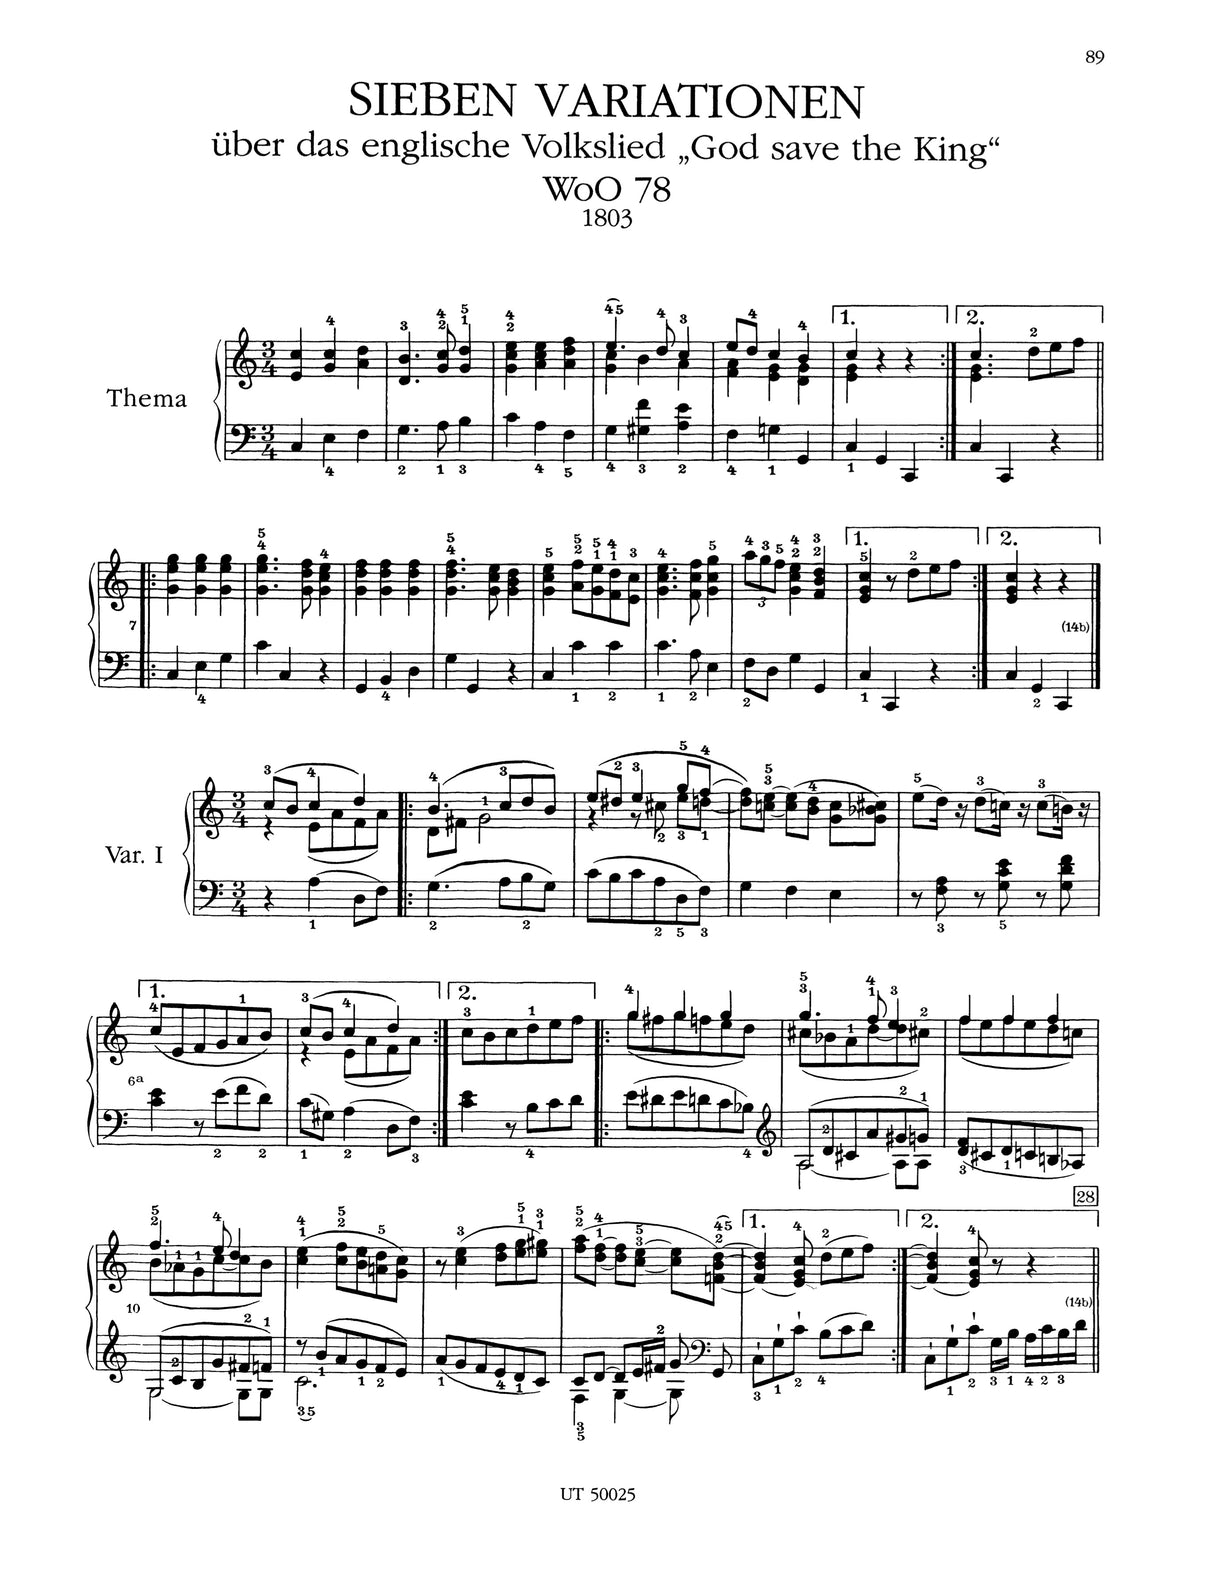 Beethoven: Variations for Piano - Volume 2